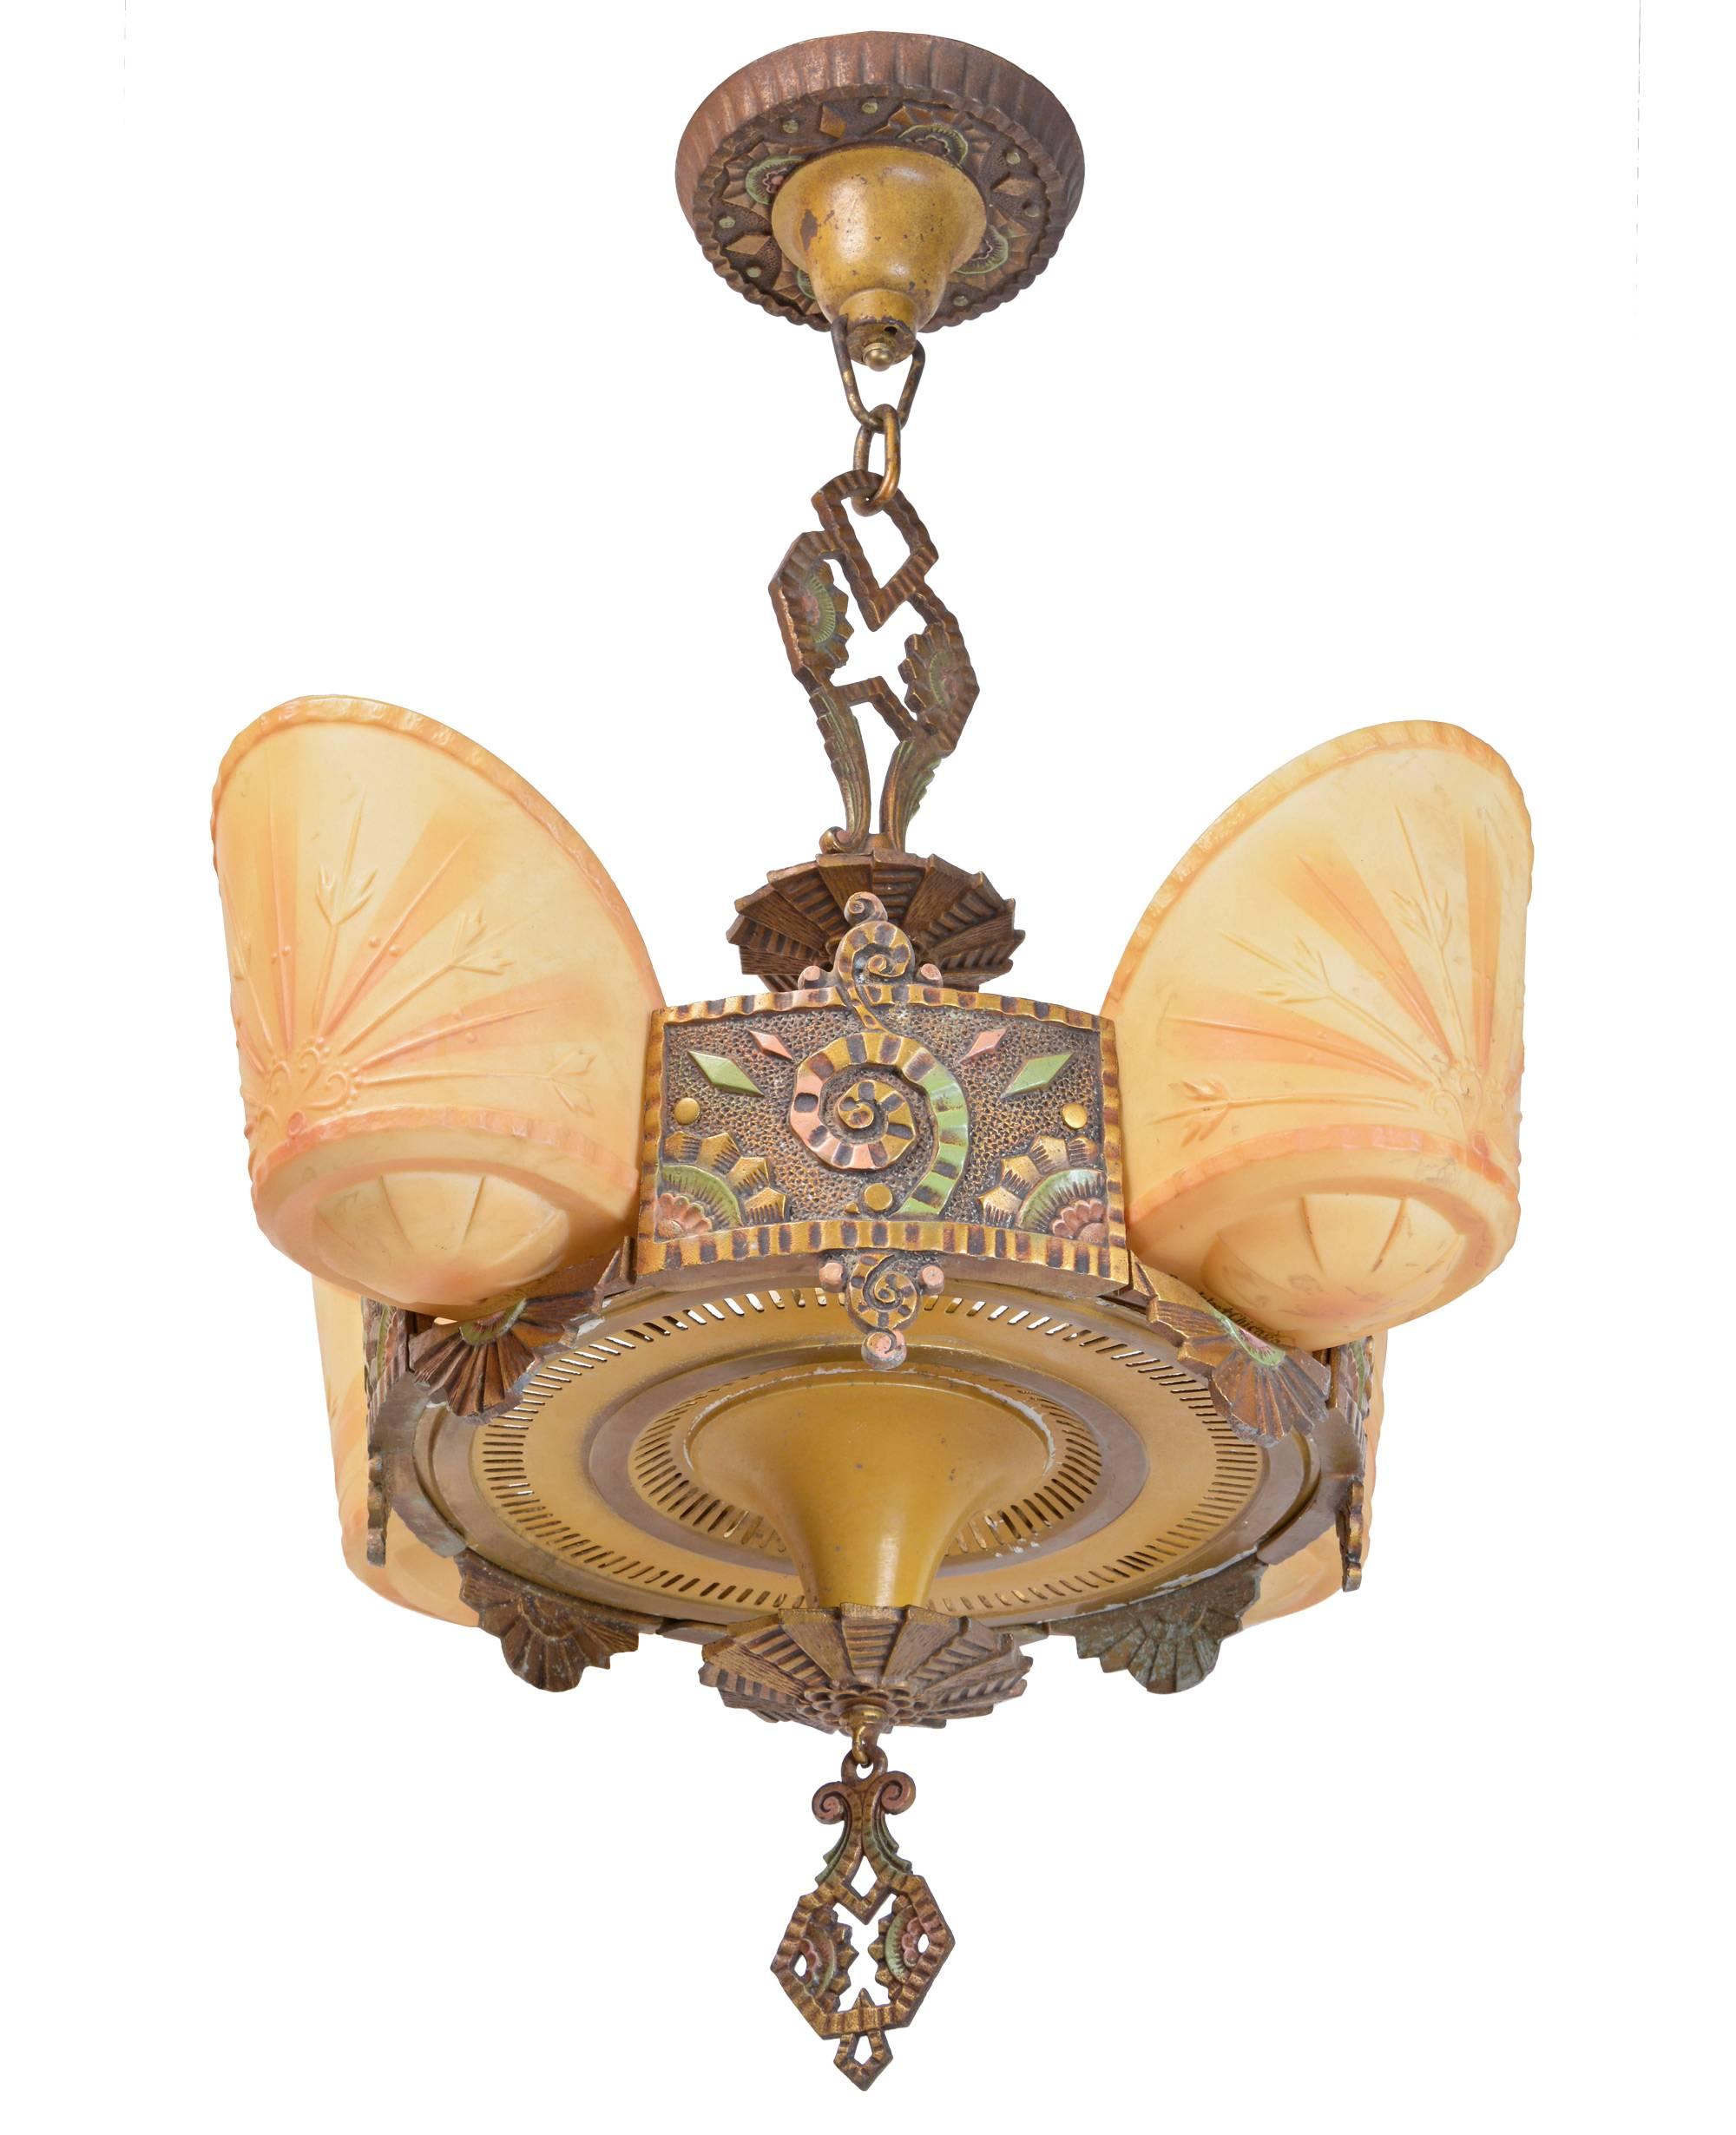 Produced by Williamson & Co, Chicago’s Premium lighting supplier in the 1930s, this chandelier is a truly rare find in antique Art Deco glass and ‘slipper shades.’ 

Often this design is signed both Williamson and Beardslee, a lighting firm out of